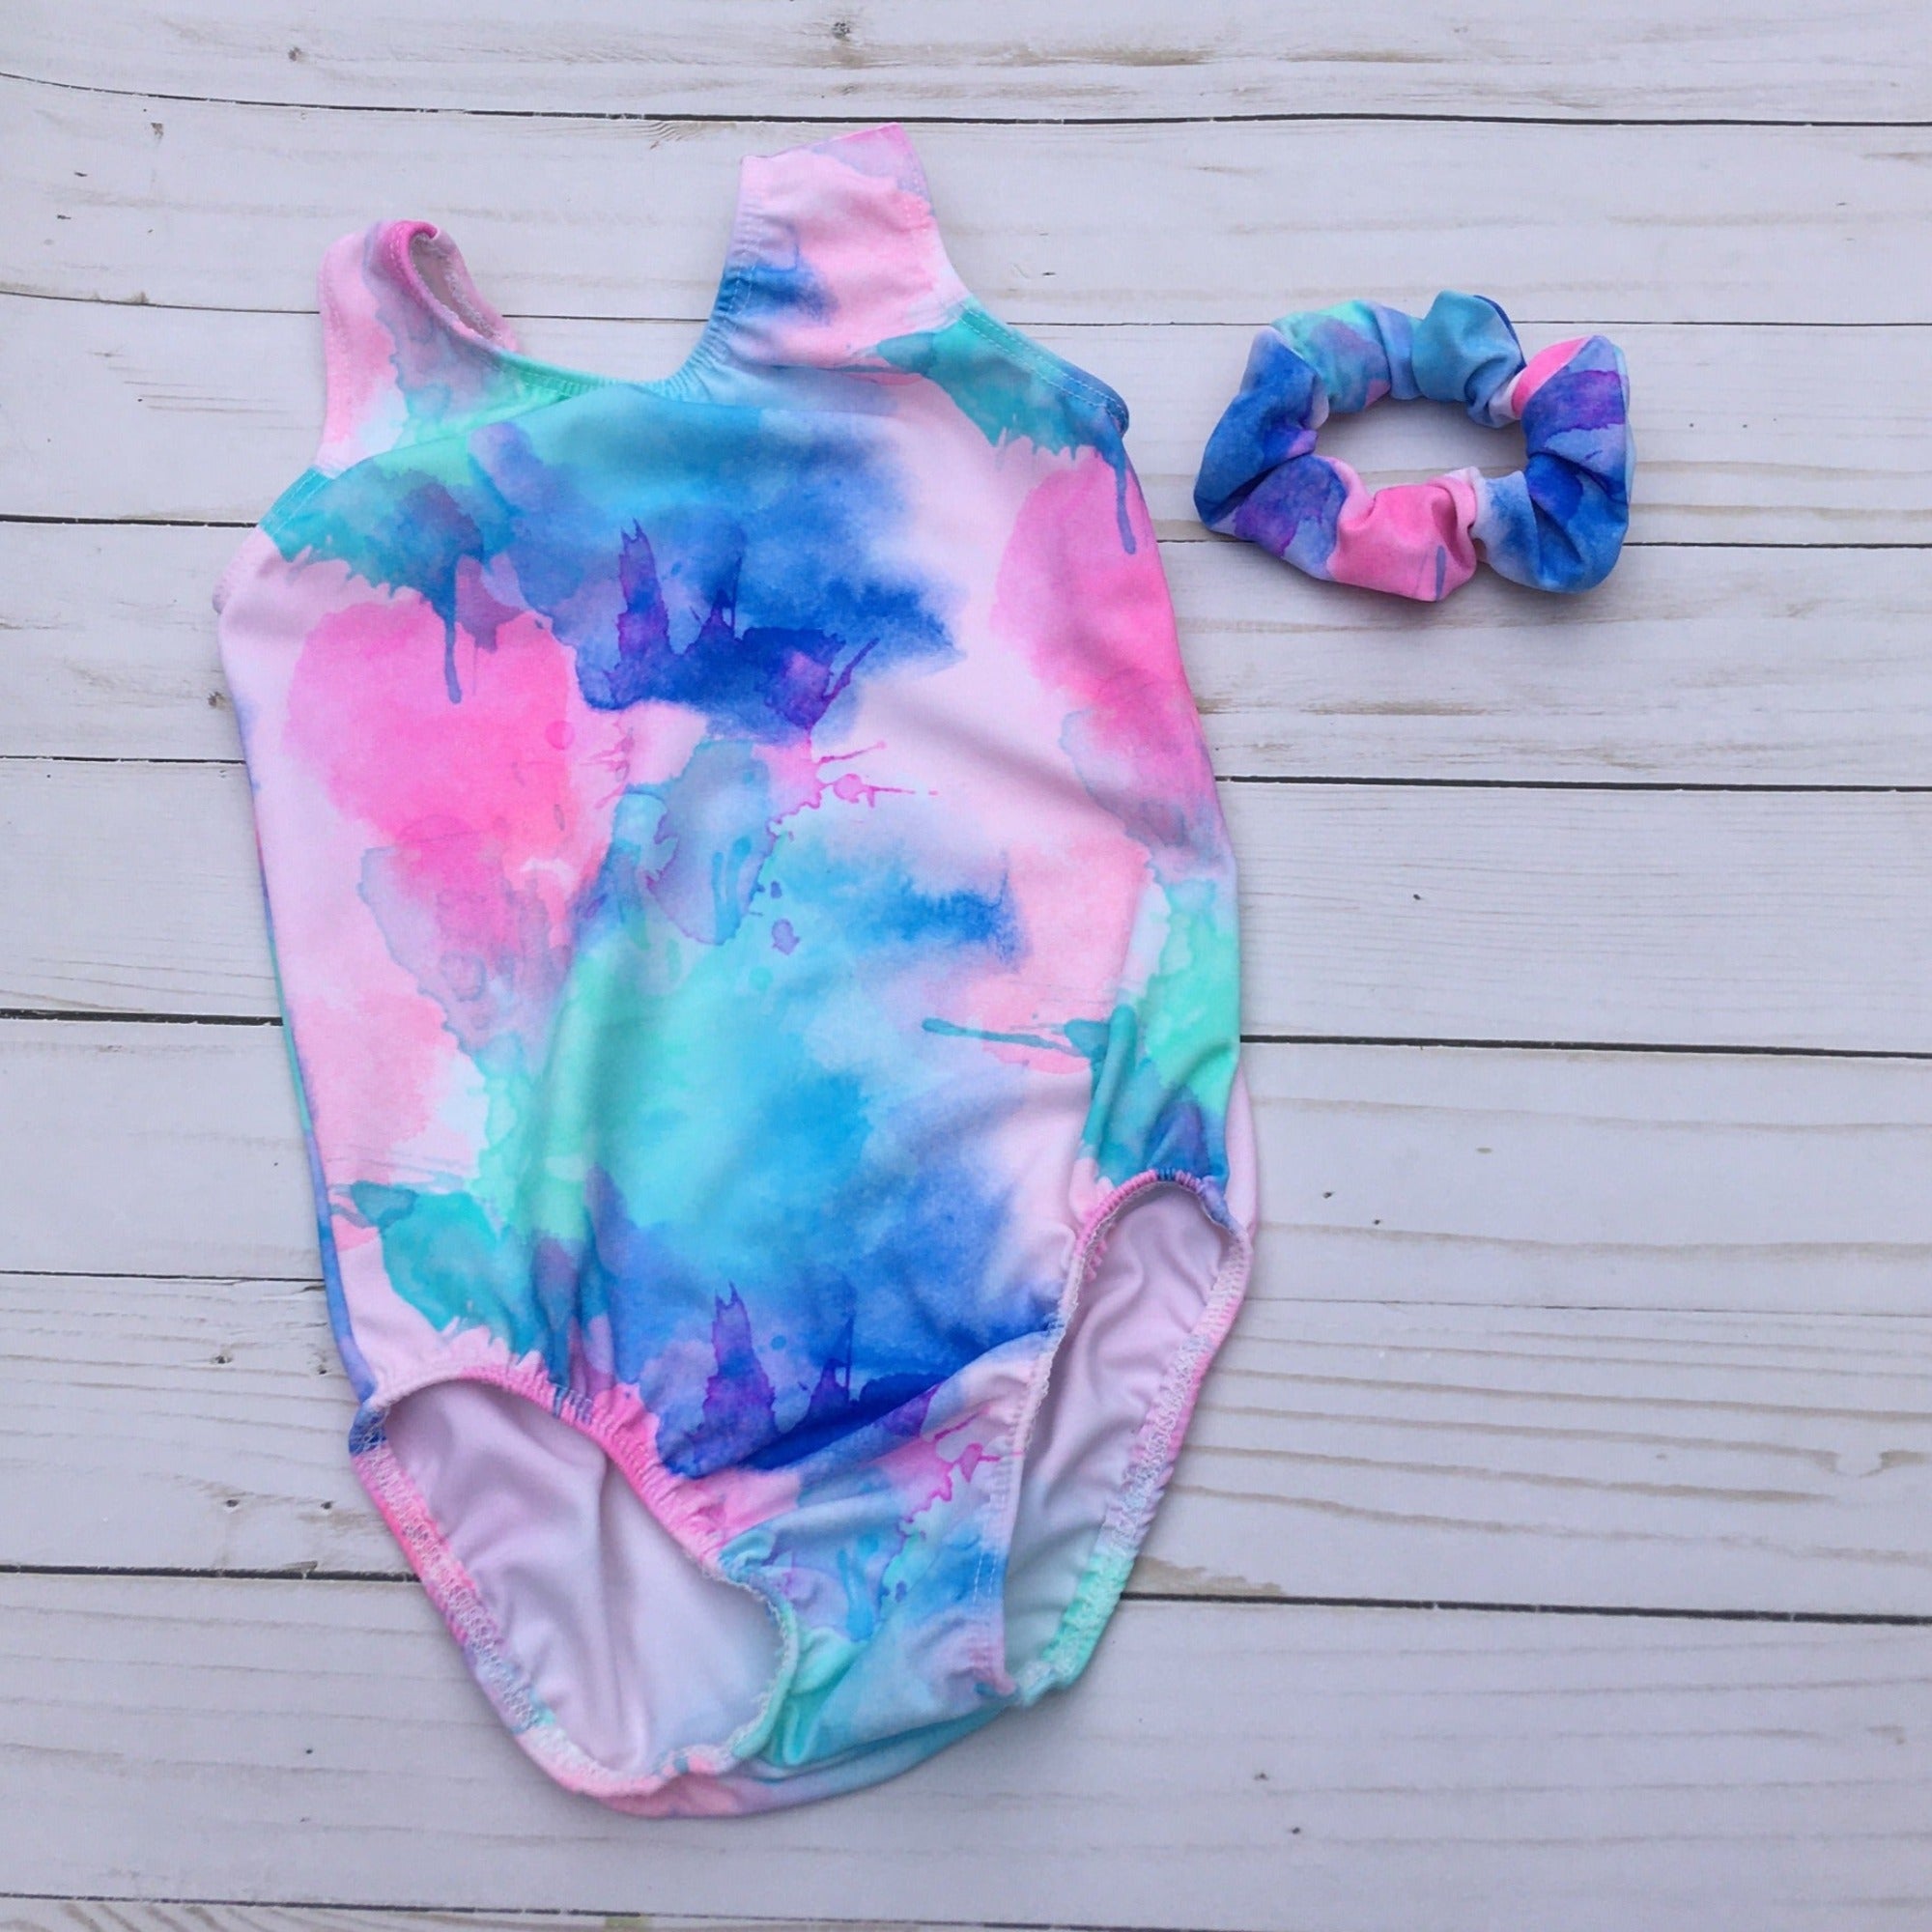 girls gymnastics tank leotard with soft pastel colors of pink, light pink, seafoam green, blue and purple in a splatter pattern.